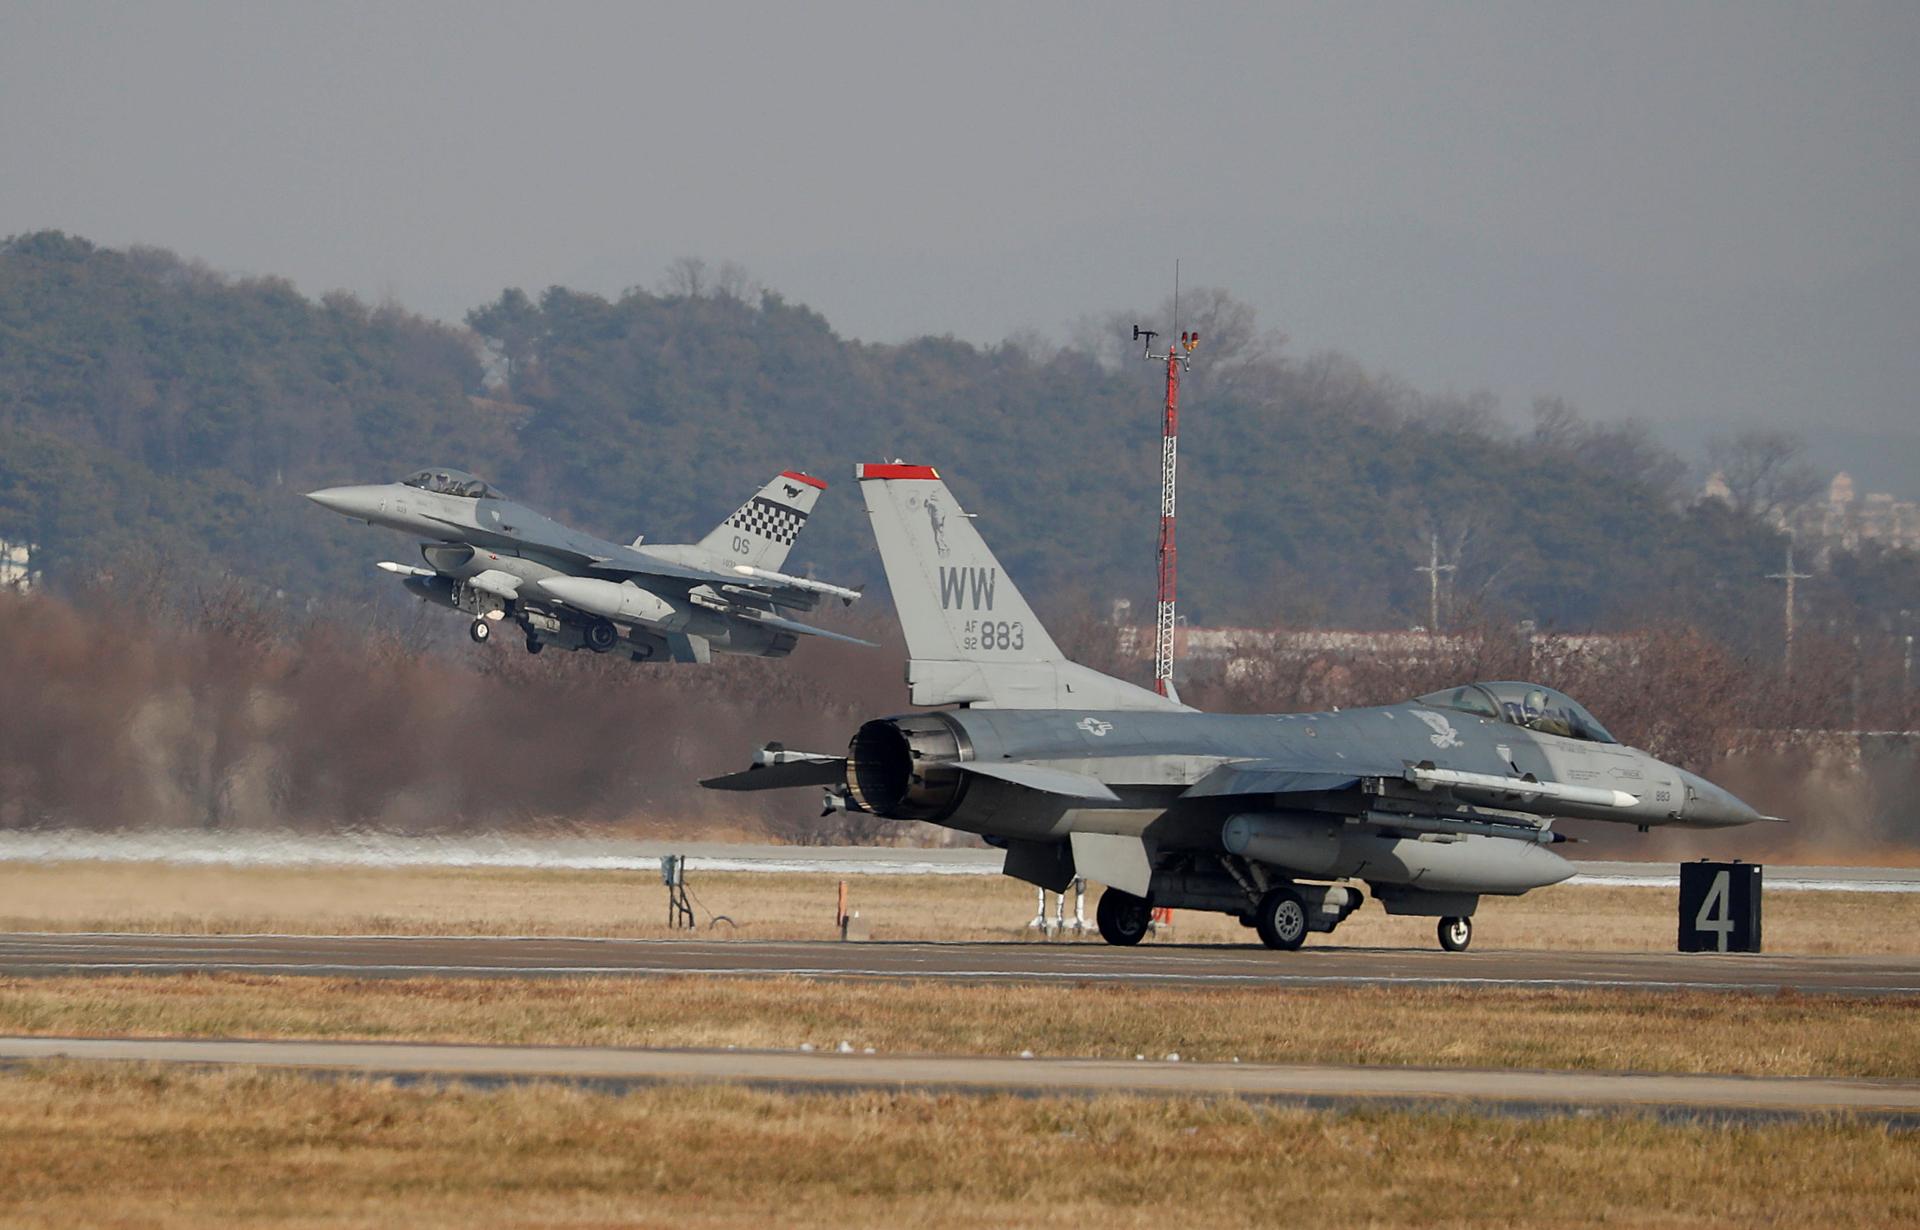 US Air Force F-16 fighter jets take part in a joint aerial drill exercise called "Vigilant Ace" between the US and South Korea